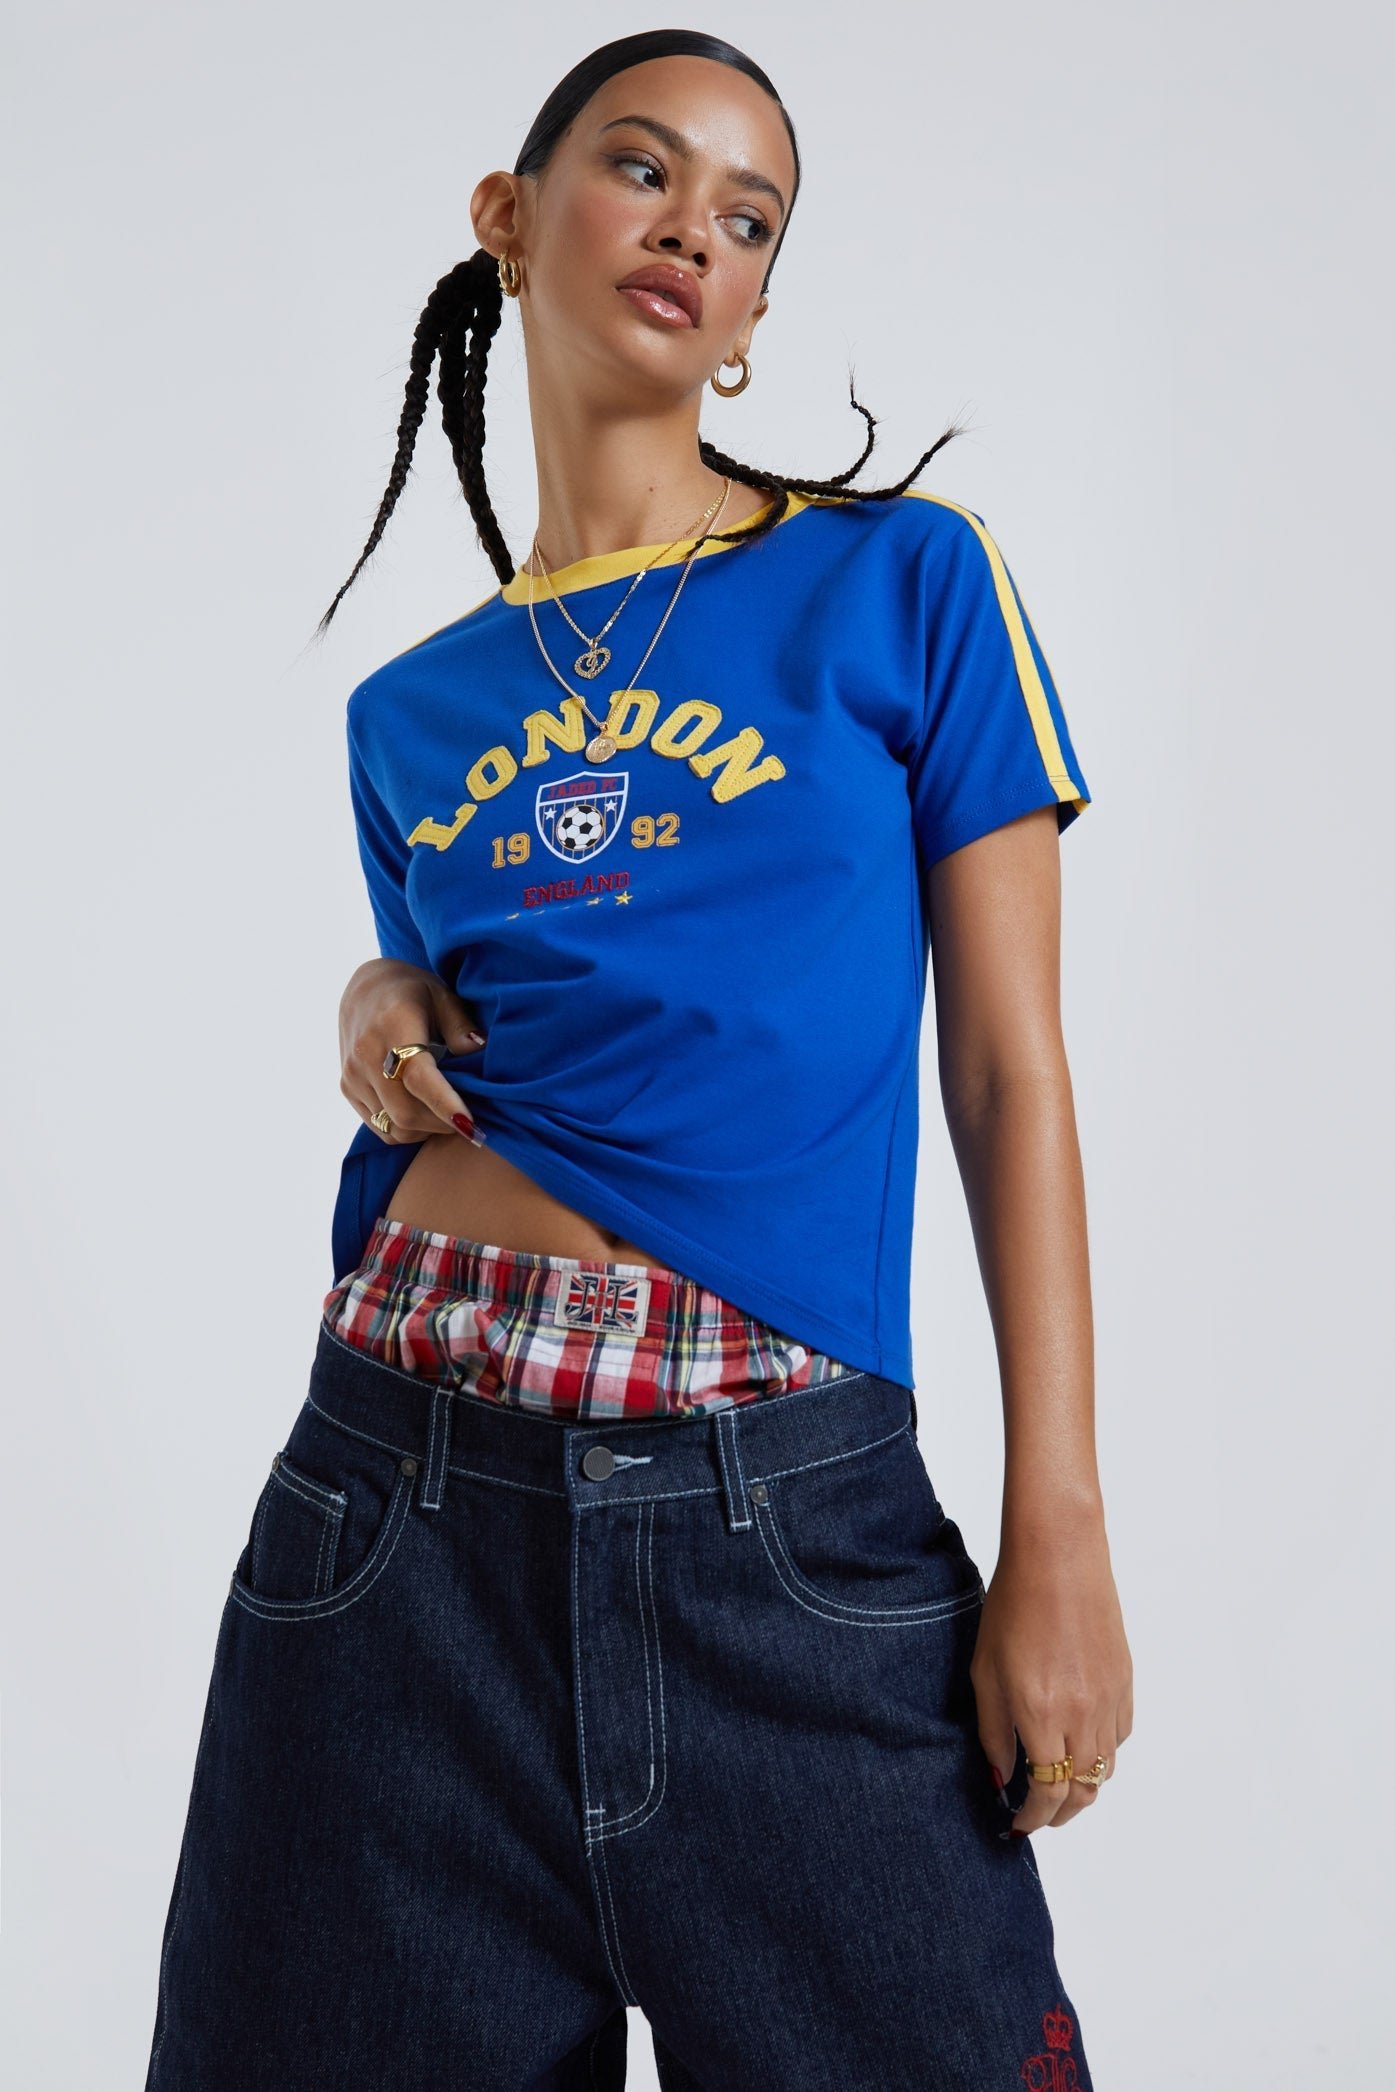 Female wearing blue baby style t-shirt with embroidered detail. Styled with oversized blue denim jorts. 